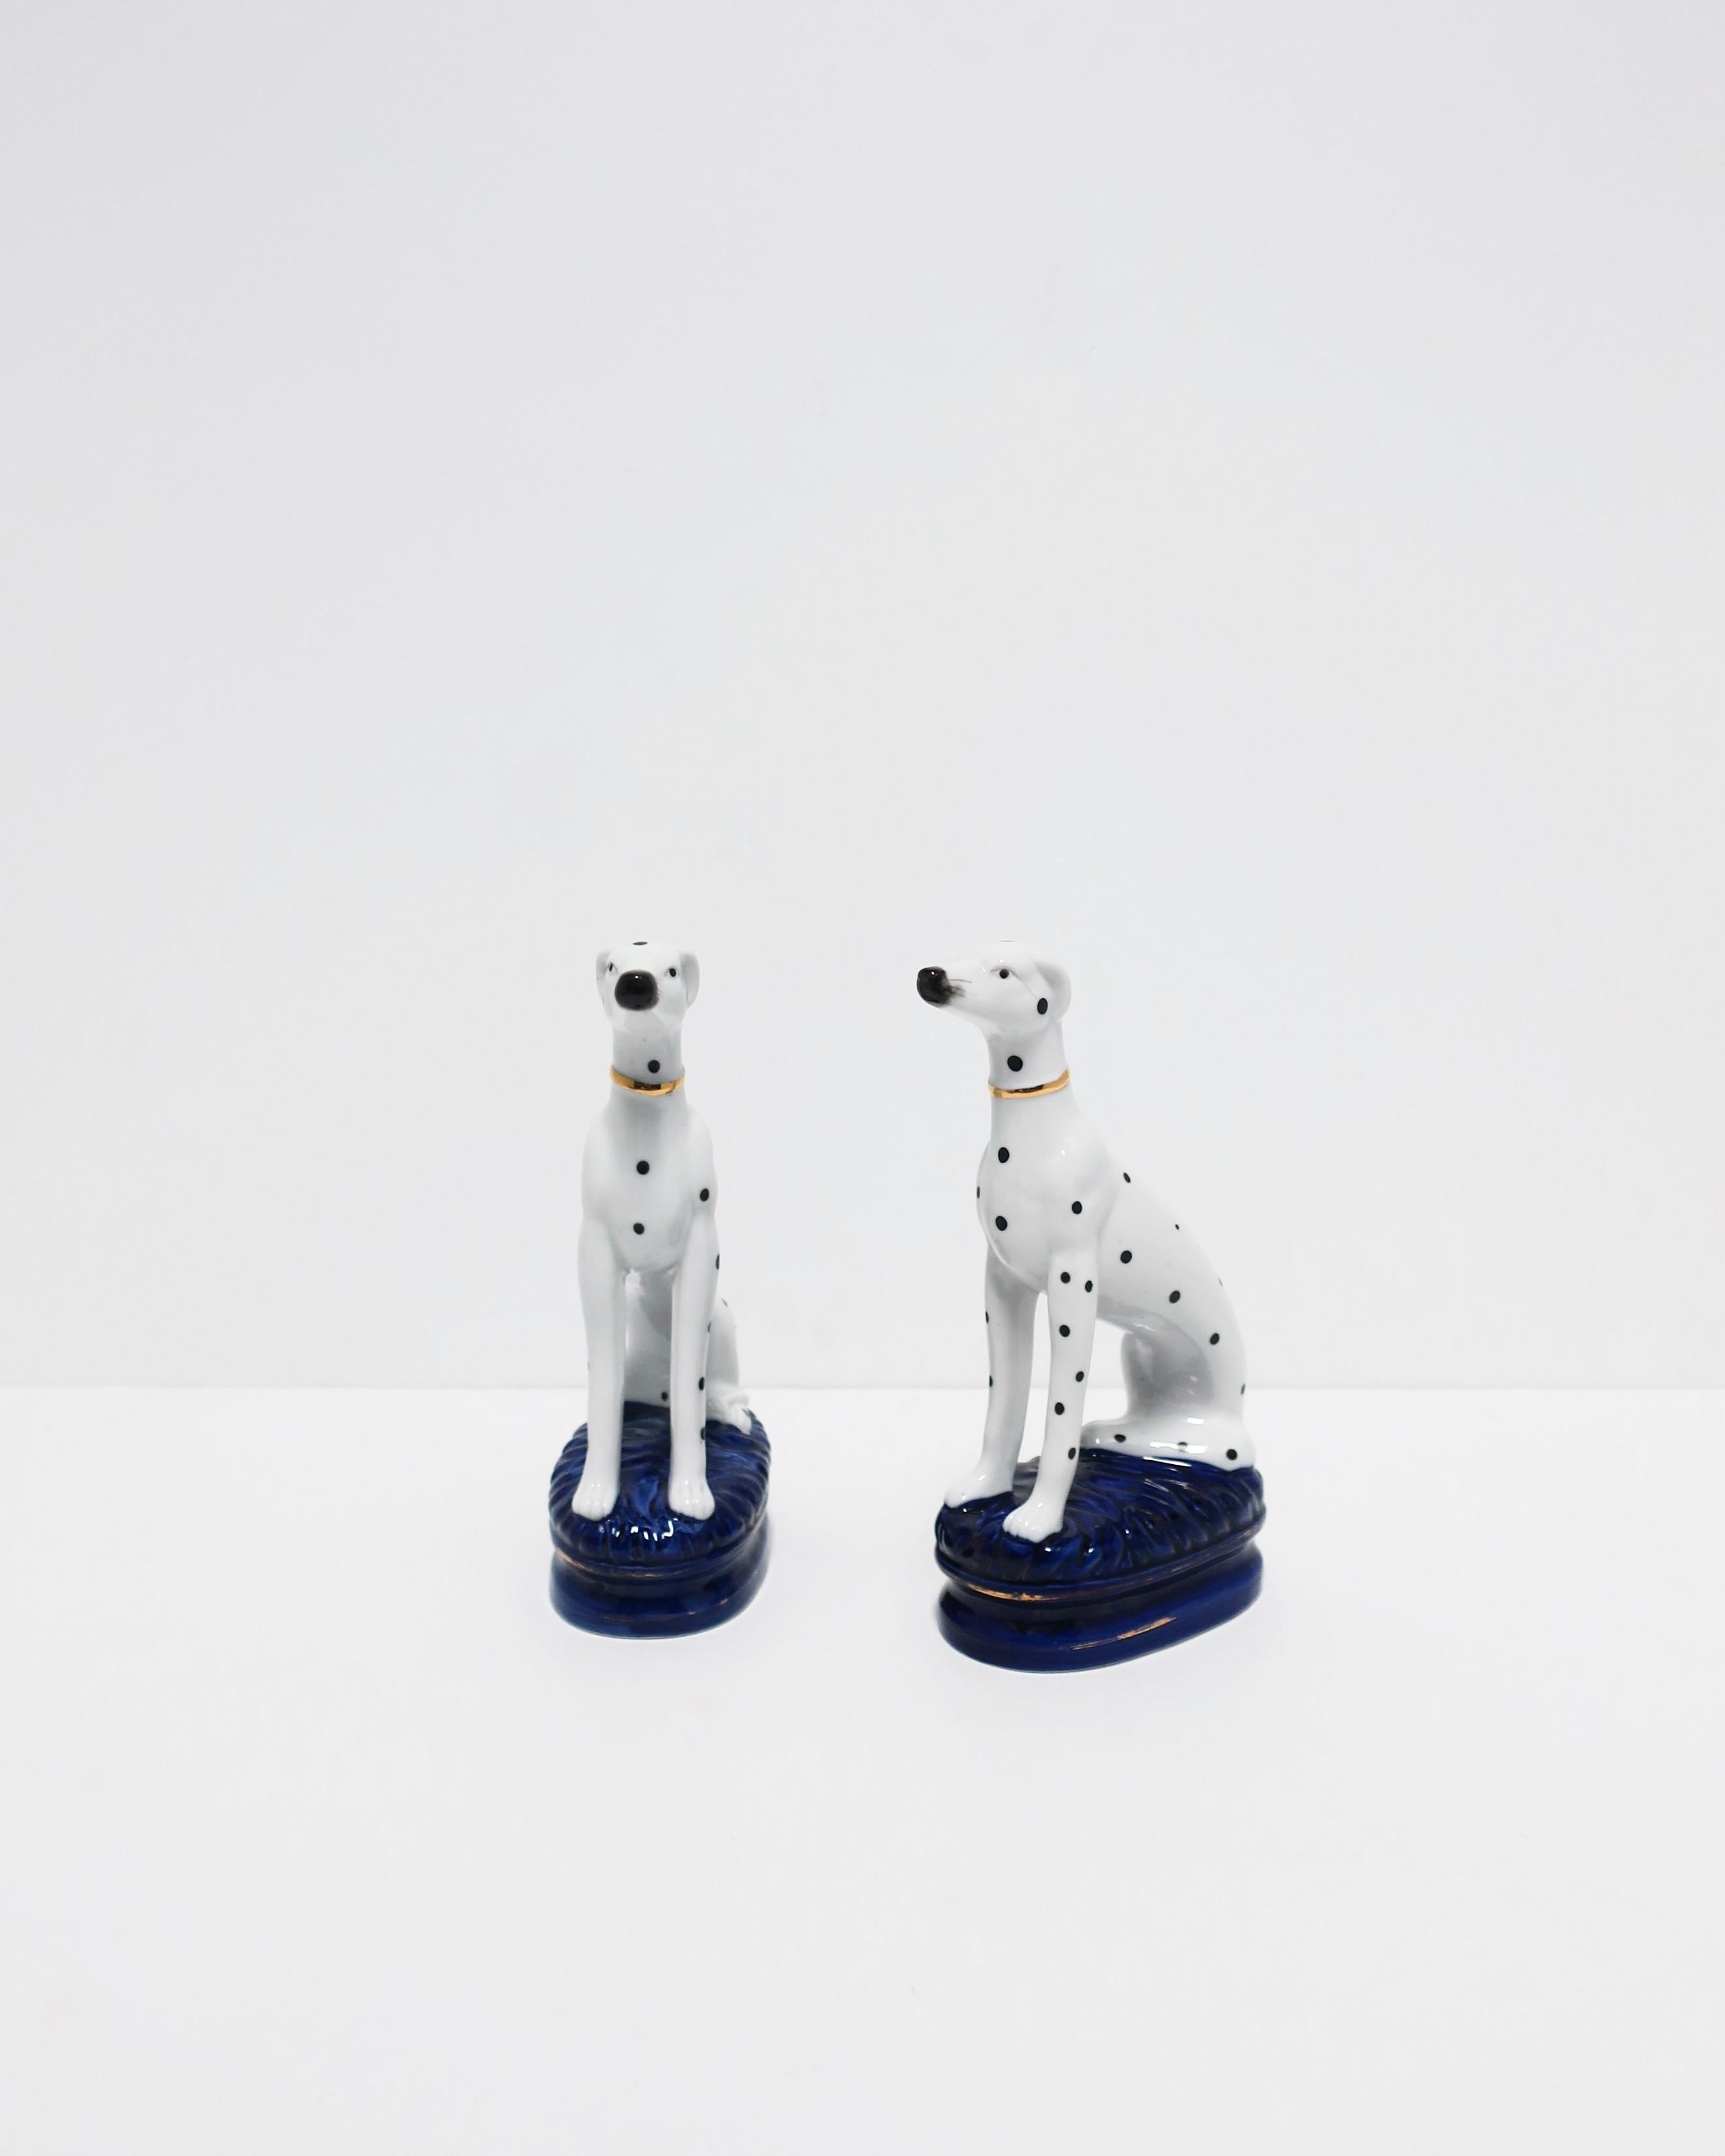 Glazed Staffordshire Black and White Greyhound Whippet Dalmatian Dogs Bookends, Pair